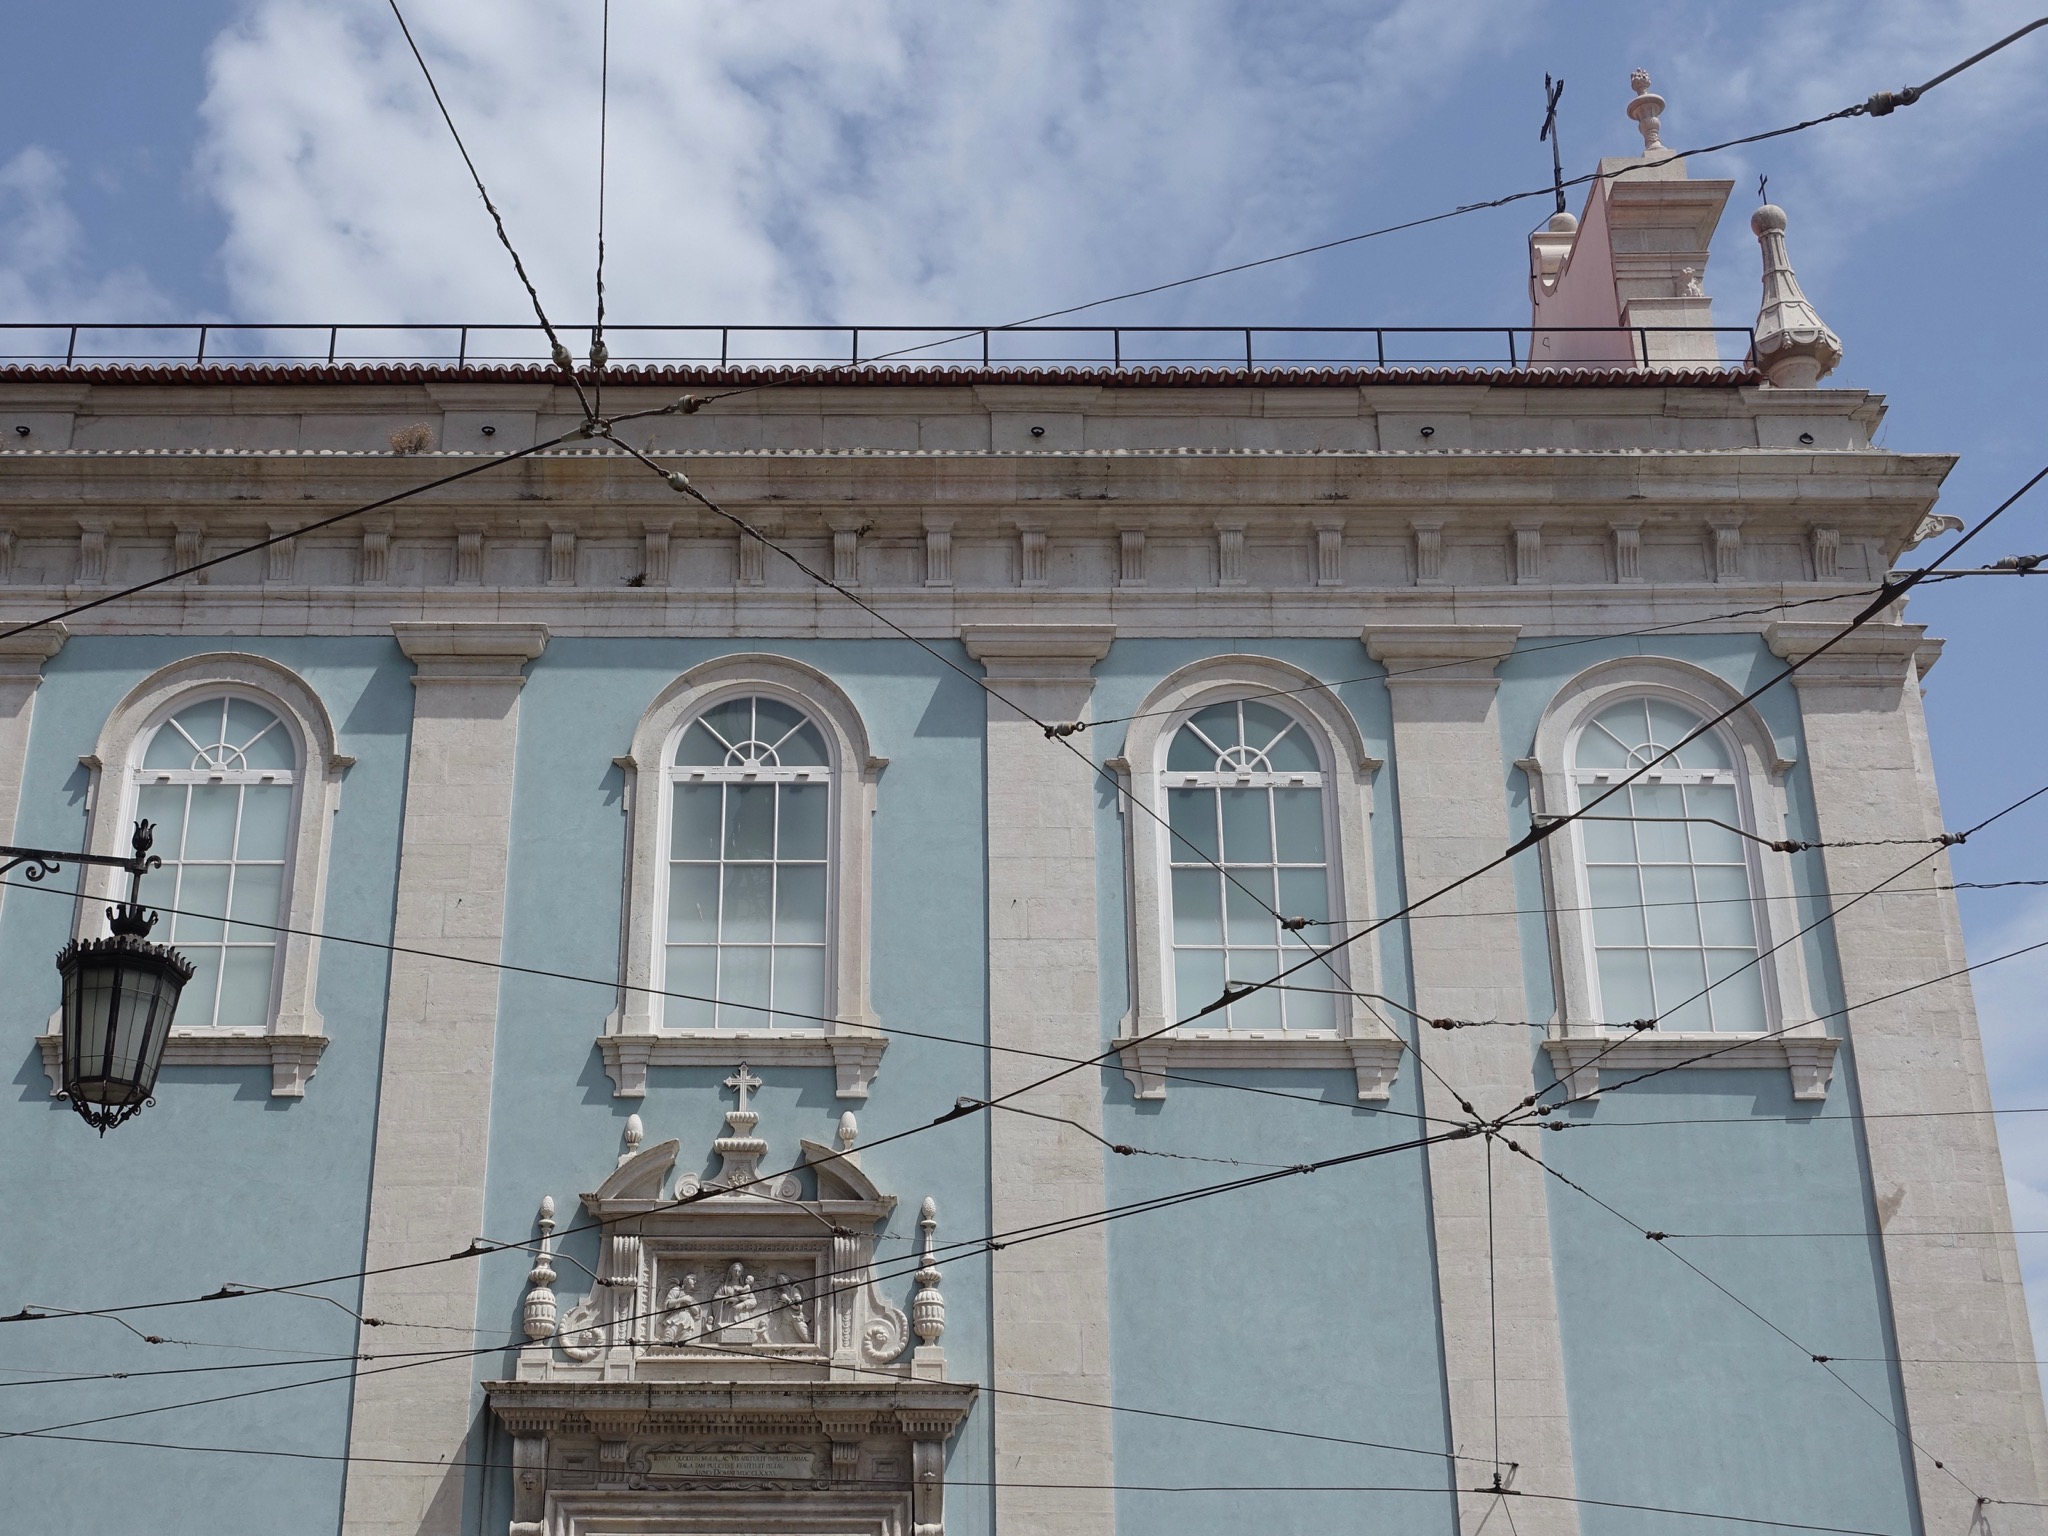 Photo 66 of 86 from the album Highlights Lisbon 2015.